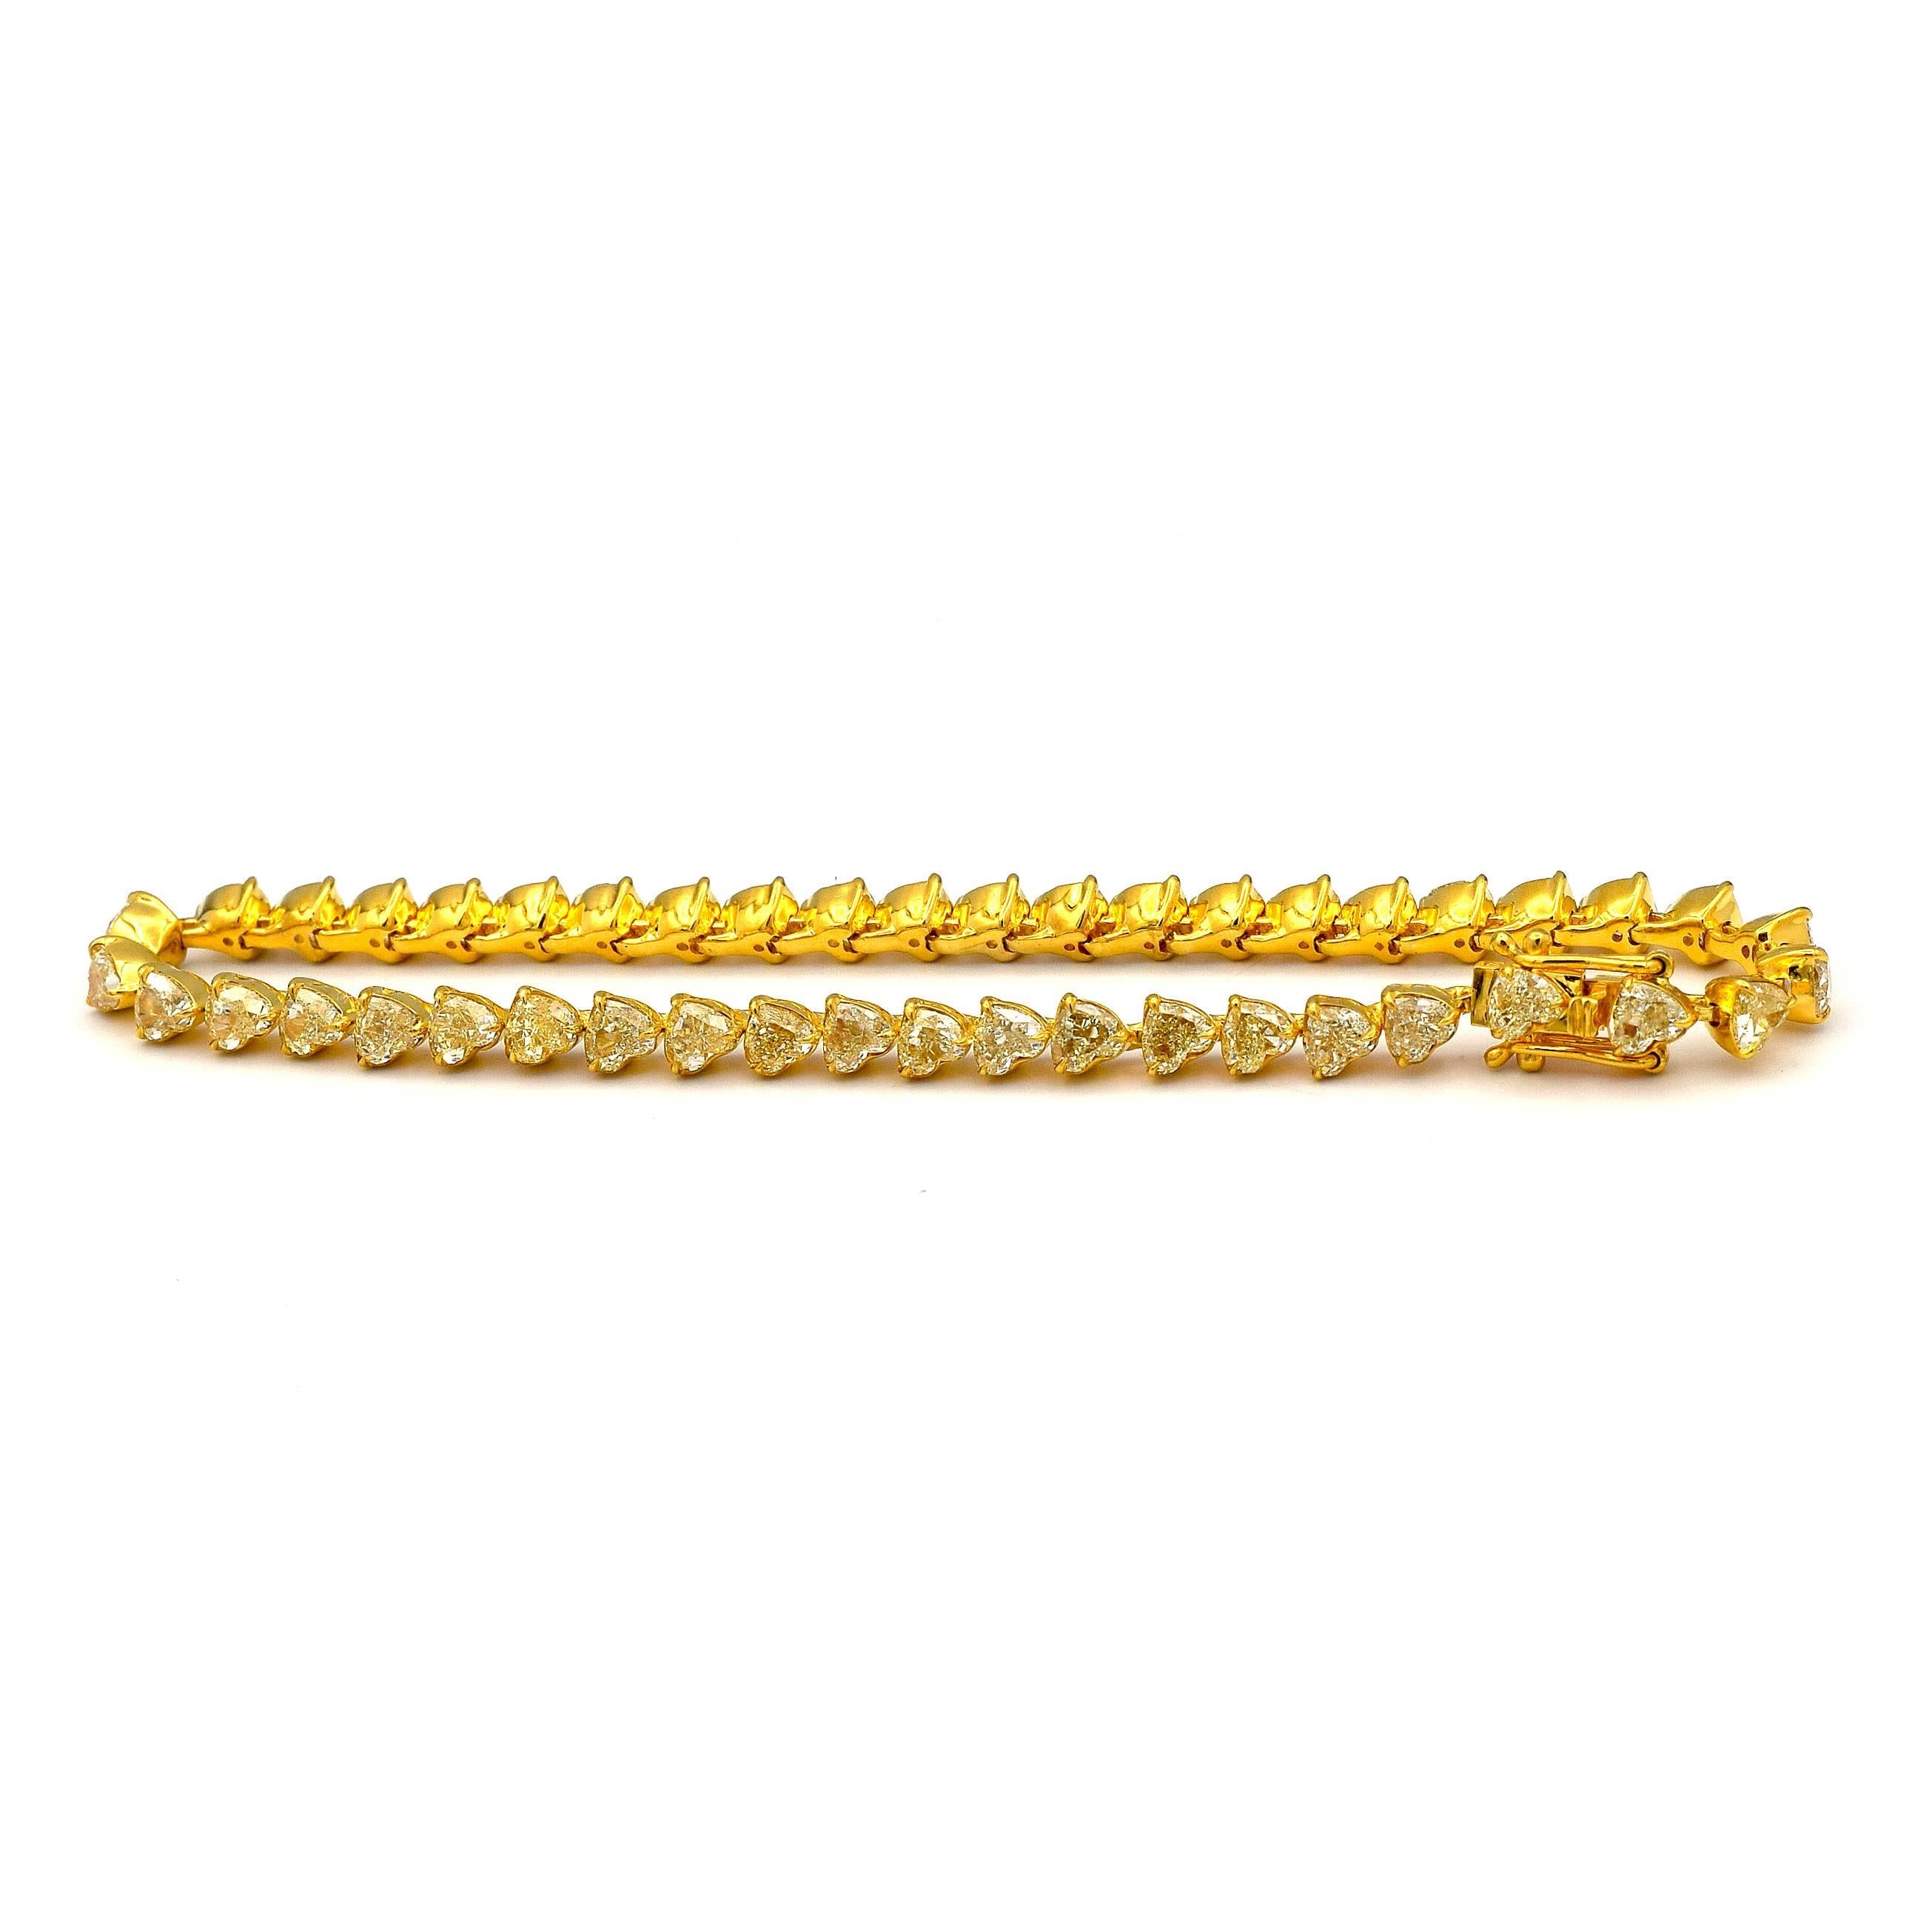 This simple and delicate Bracelet contains 44 Heart Shaped diamonds, giving it a total weight of 9.47ct. 

Mounted in 18K Yellow Gold, giving the bracelet a total weight of 10.76 grams. 